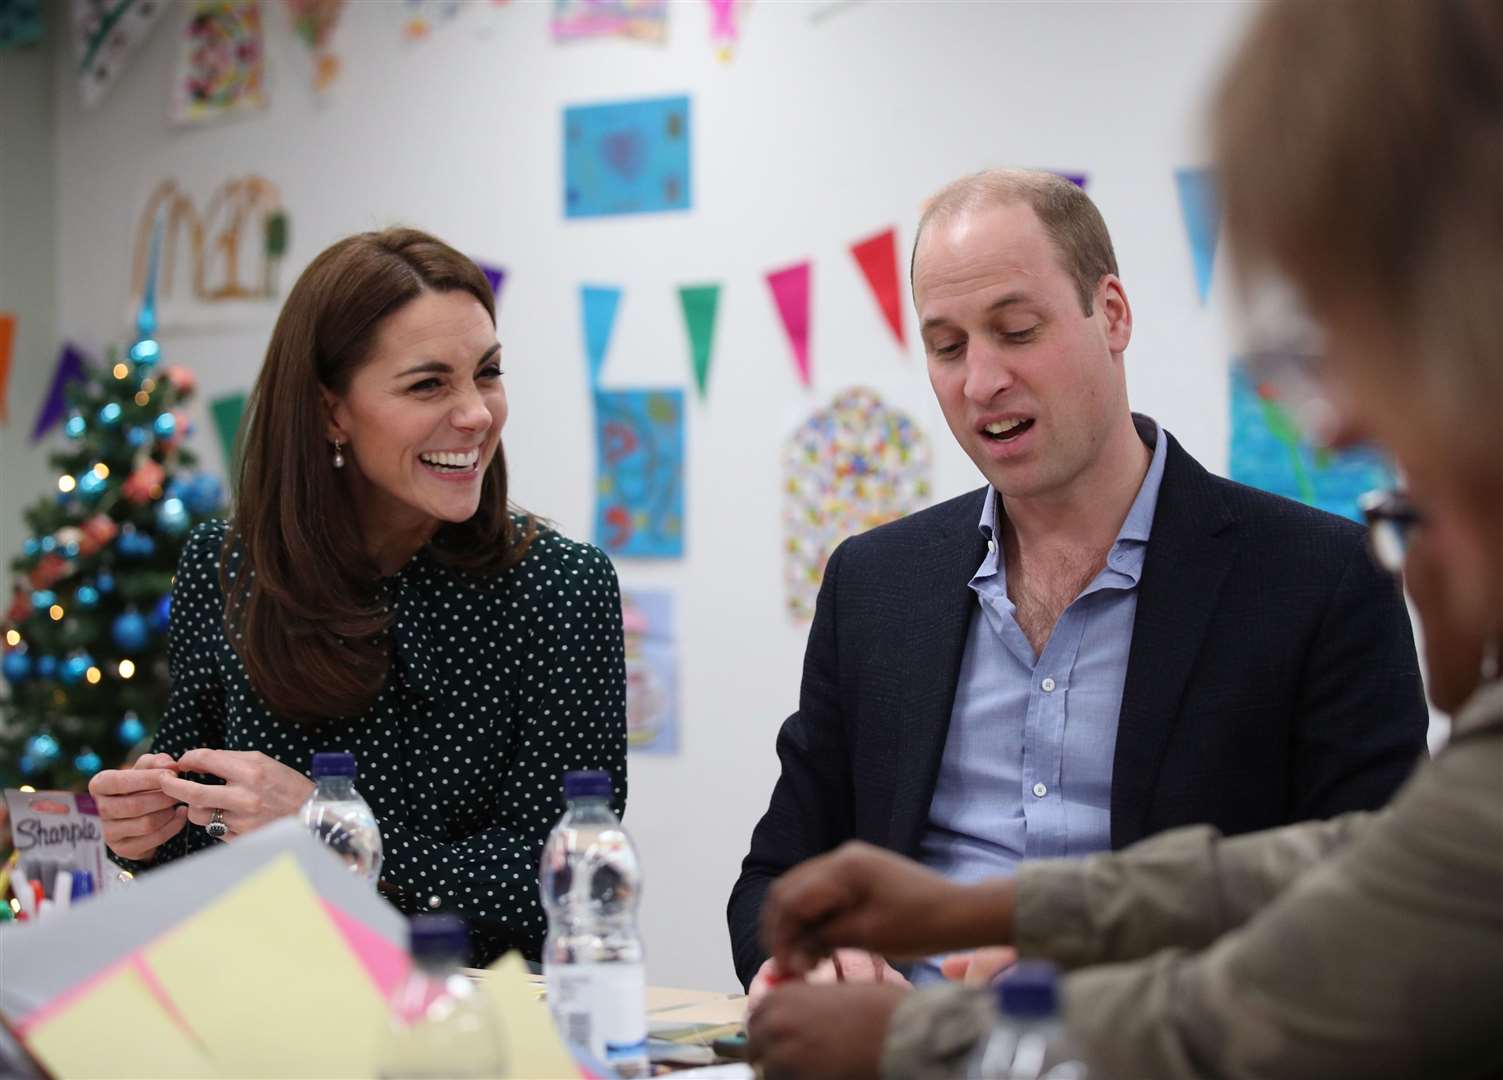 William and Kate joined clients of the homeless charity The Passage for an arts and craft session in December 2018 (Yui Mok/PA)